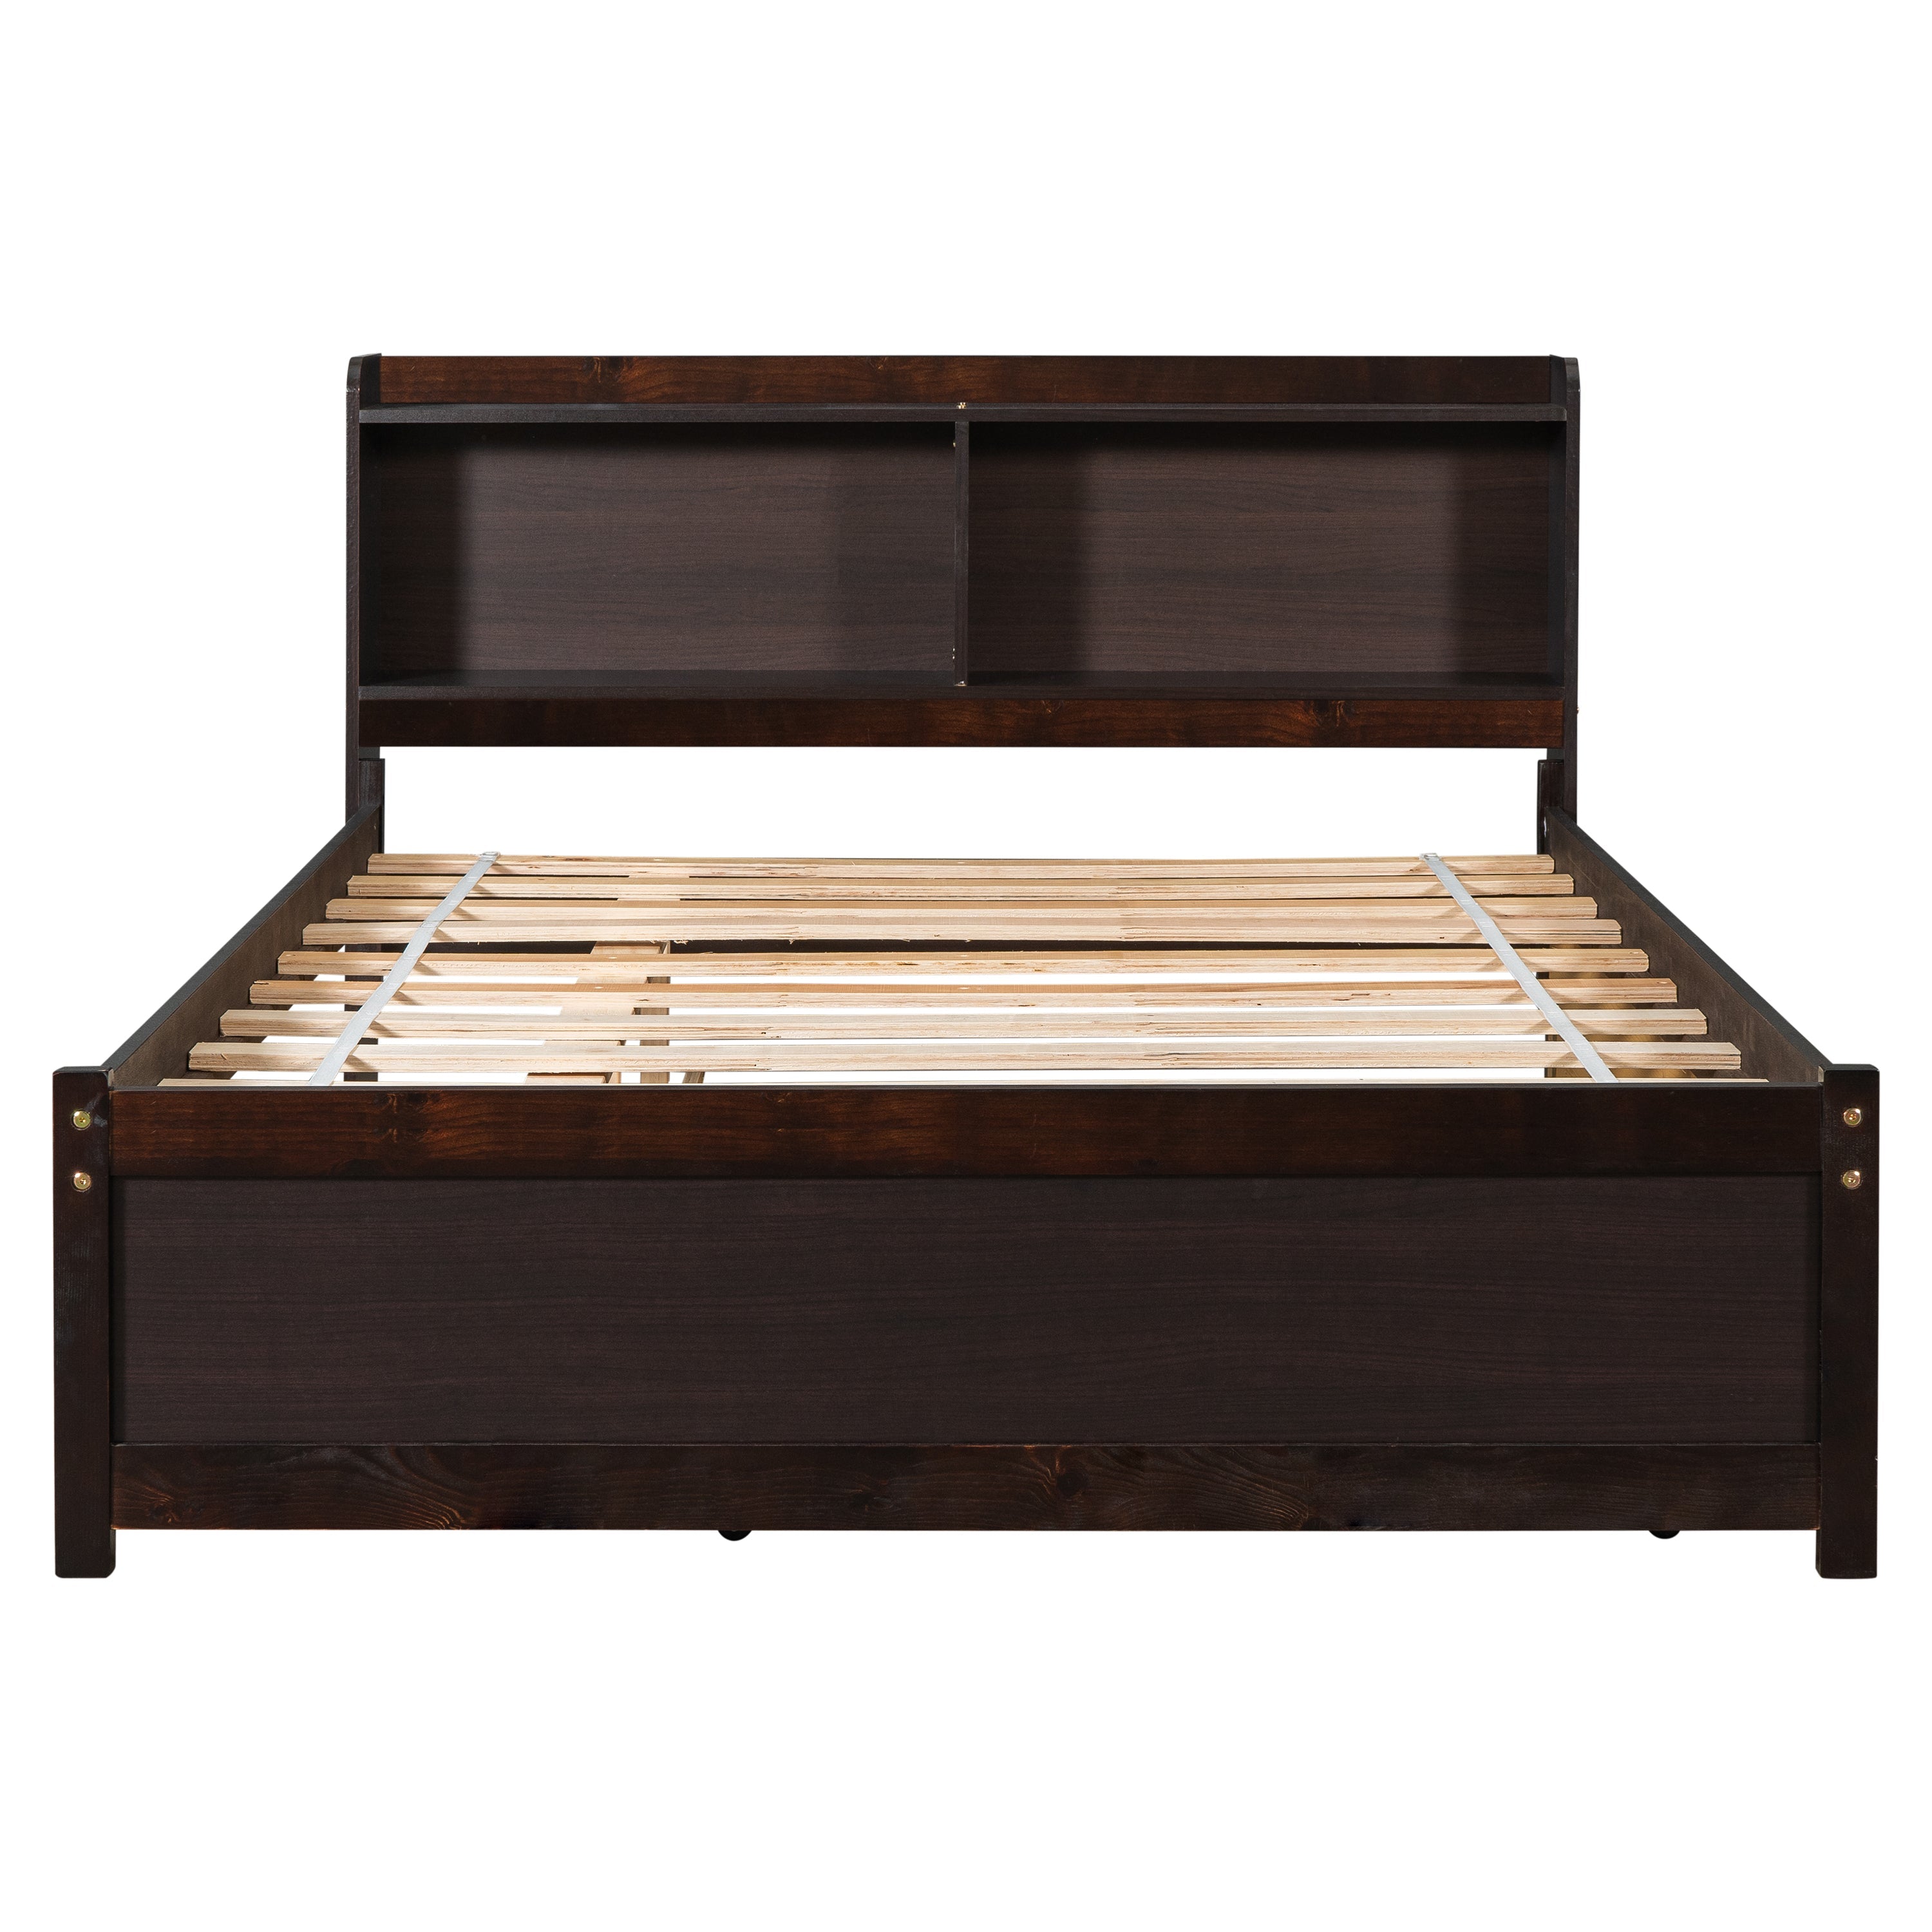 Full Bed Frame with Trundle Included, BTMWAY Wood Platform Bed with Storage Bookcase and Headboard, No Box Spring Needed, Full Size Bed Frame for Kids Boys Girls Teens, 85''x57.5''x36.7'', Espresso